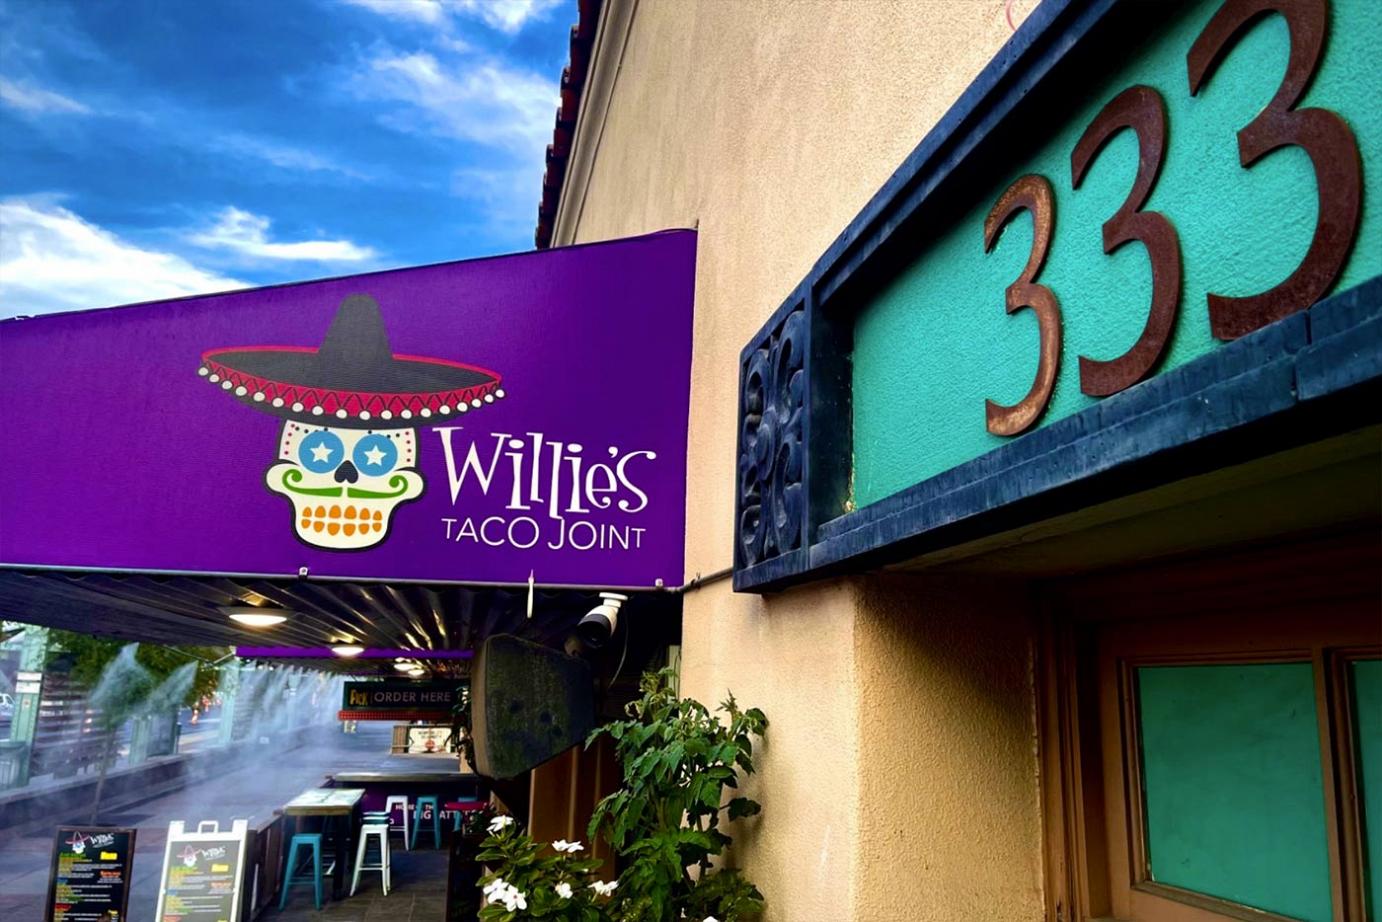 Willie's Taco Joint exterior